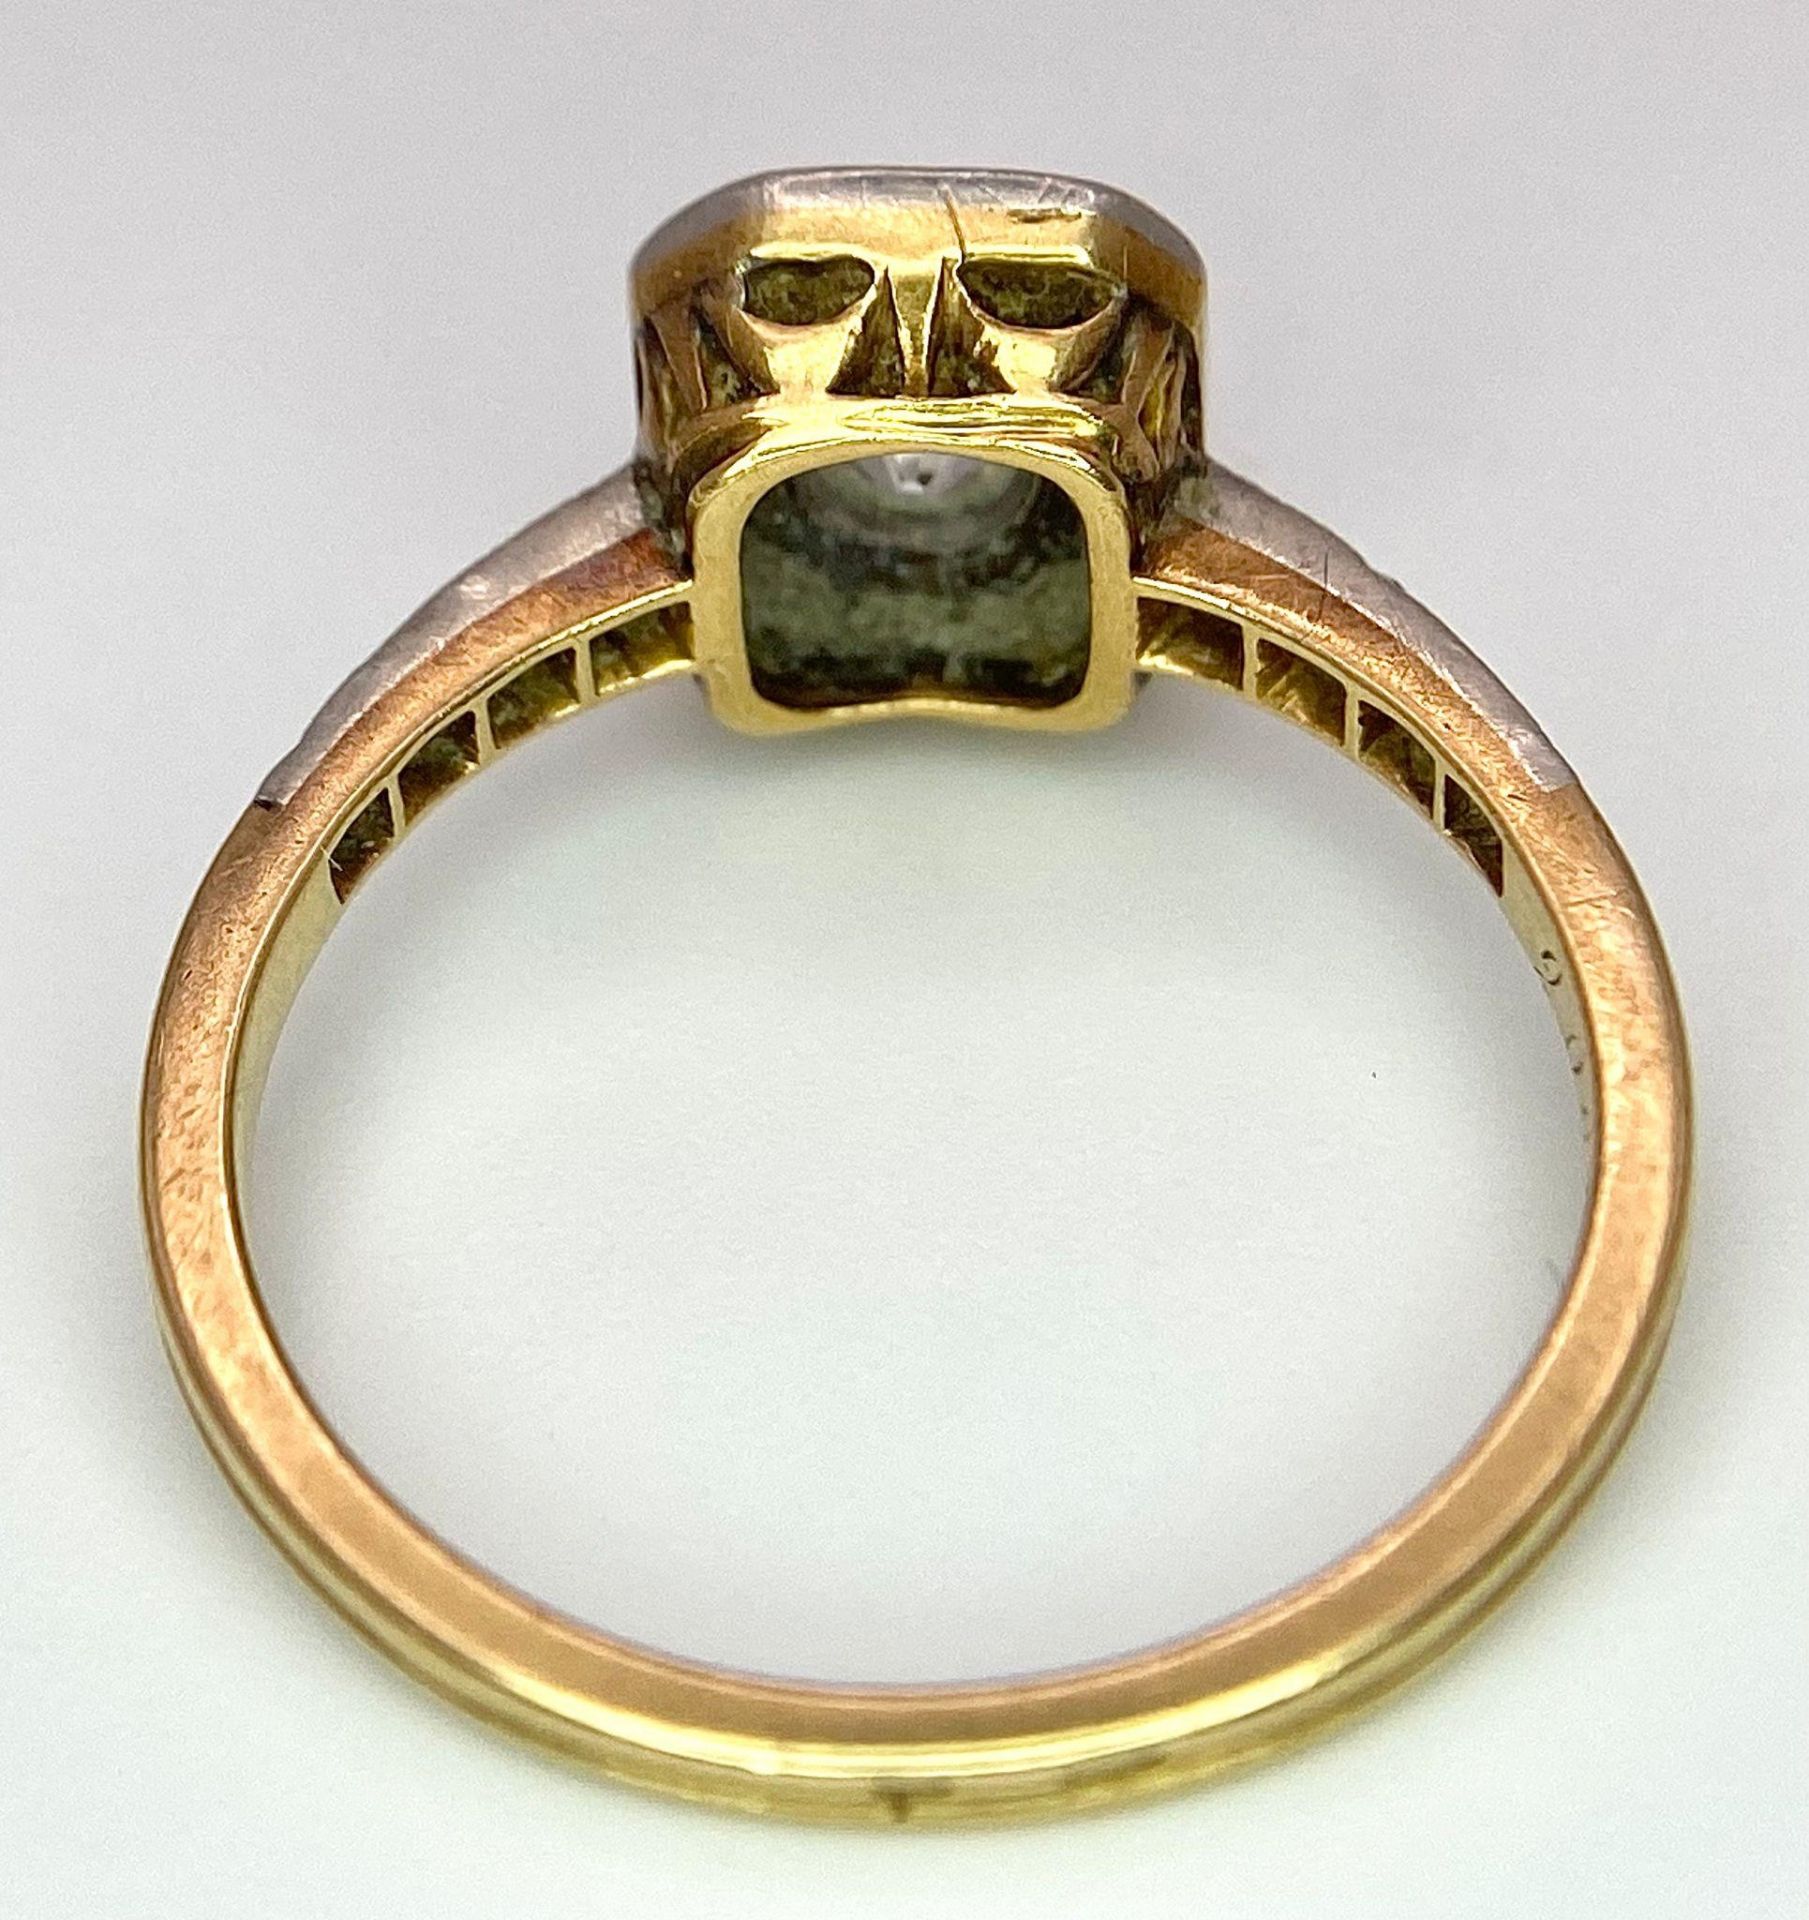 A 9 K yellow gold ring with an ART DECO style diamond cluster and more diamonds on the shoulders, - Image 7 of 8